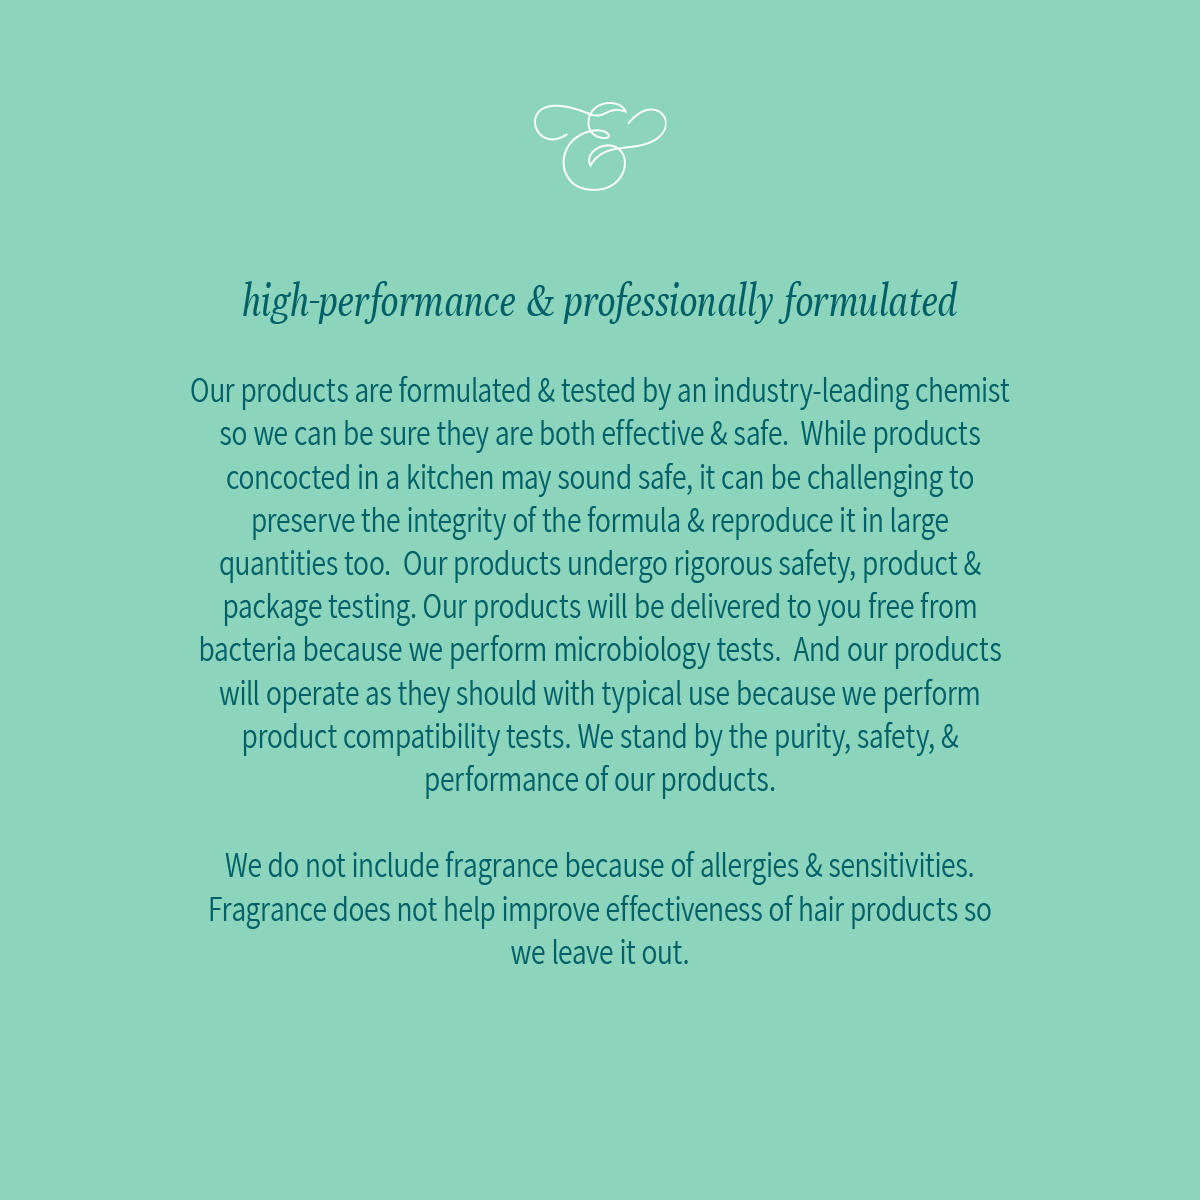 high-performance & professionally formulated